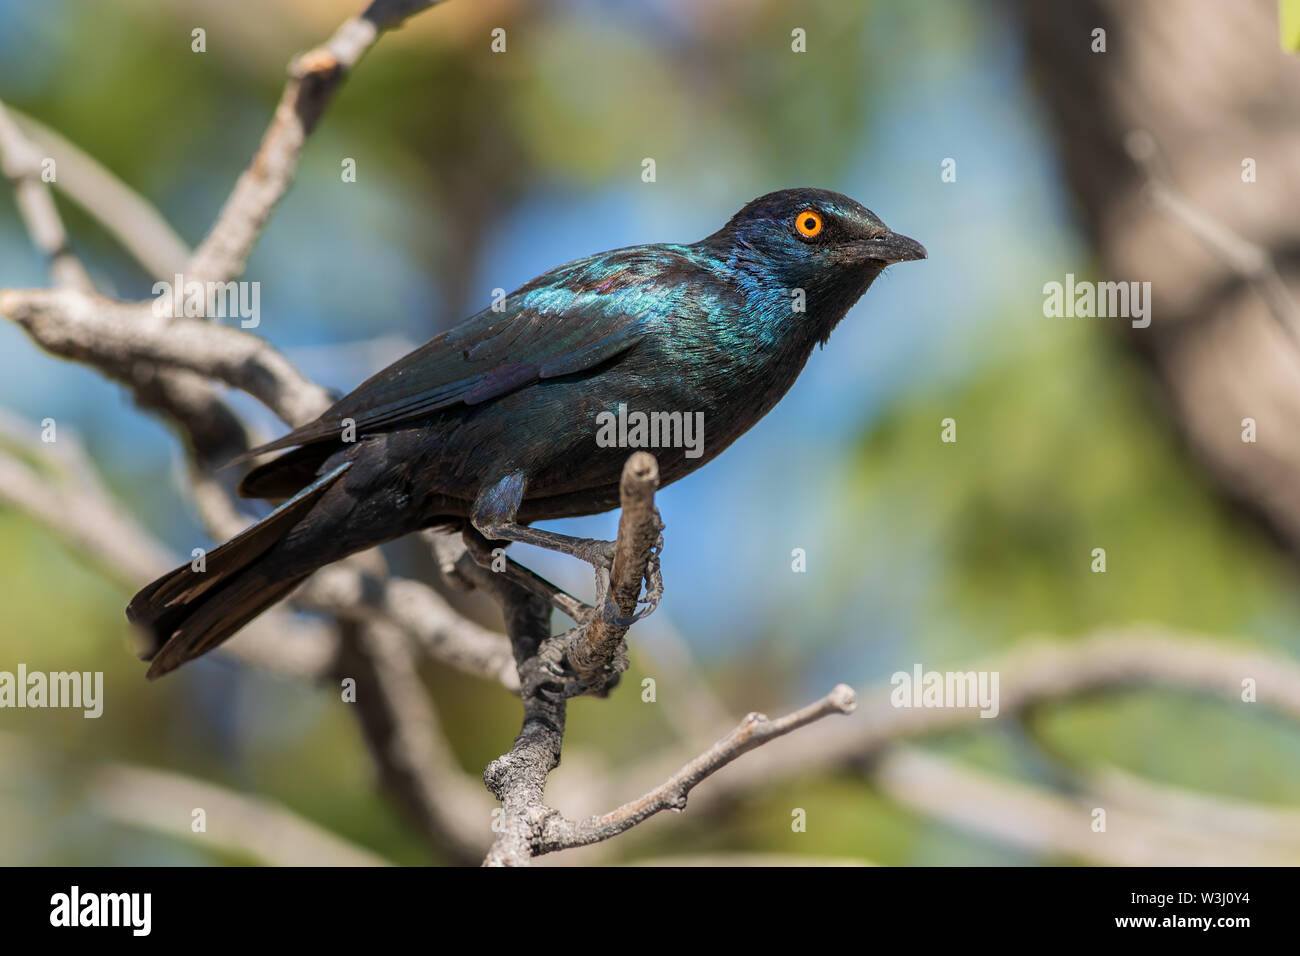 Red-shouldered Glossy-starling - Lamprotornis nitens, beautiful glossy blue perching bird from African savannas, Namibia. Stock Photo